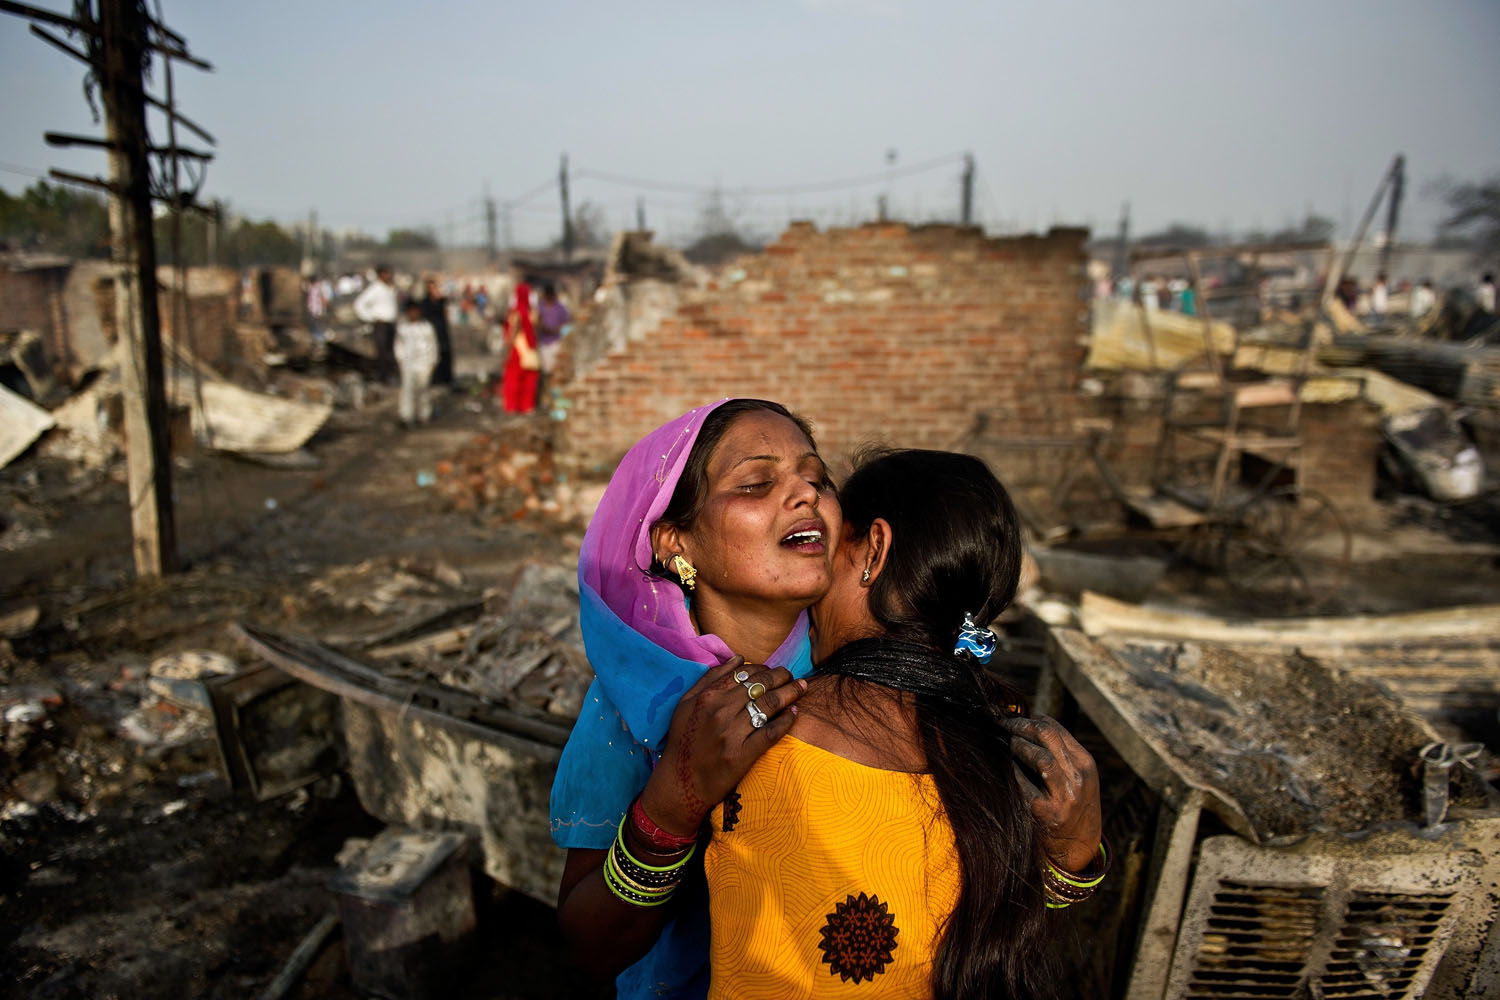 April 12, 2013. Indian slum residents weep as they stand near their burnt shanty in Bawana on the outskirts of New Delhi. A fire broke out in a slum on the outskirts of New Delhi, a local report said, with one person reported dead and another five injured.